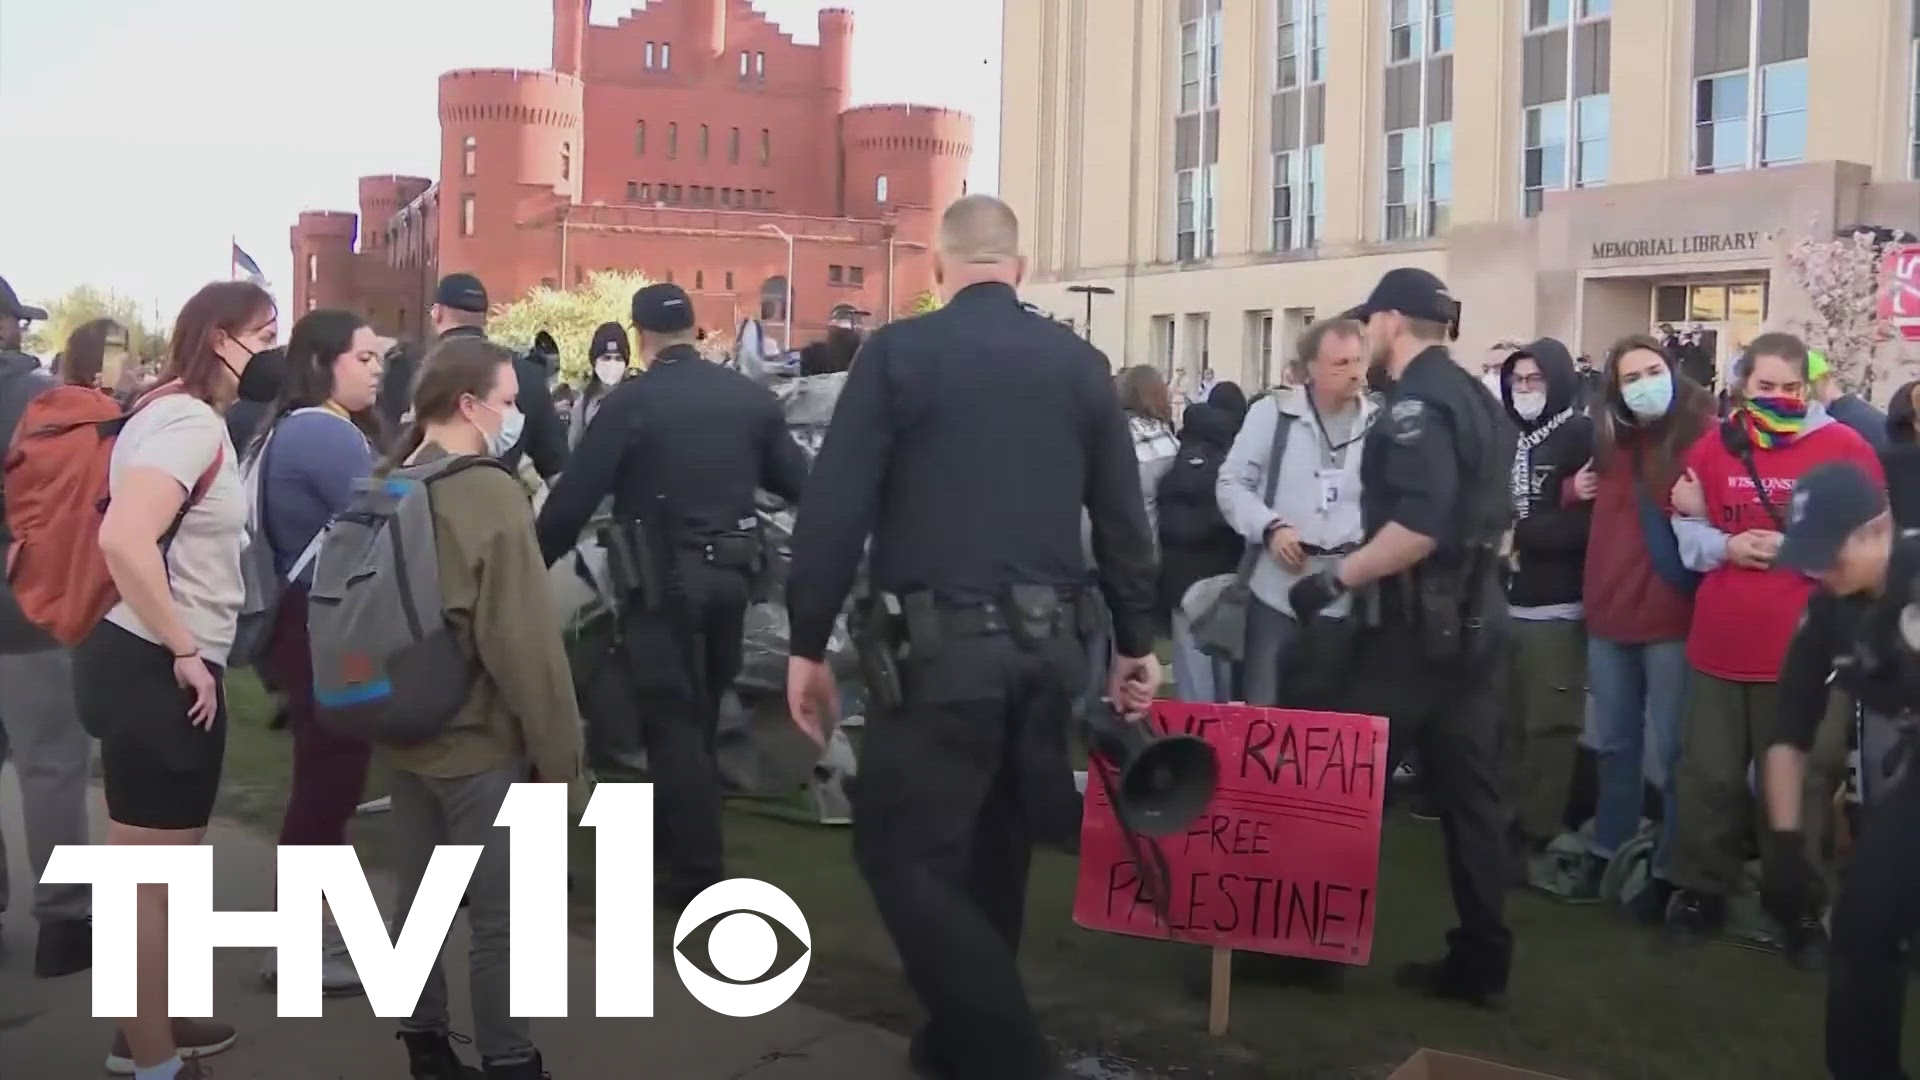 There has been an uptick in the number of protests on college campuses across the country.